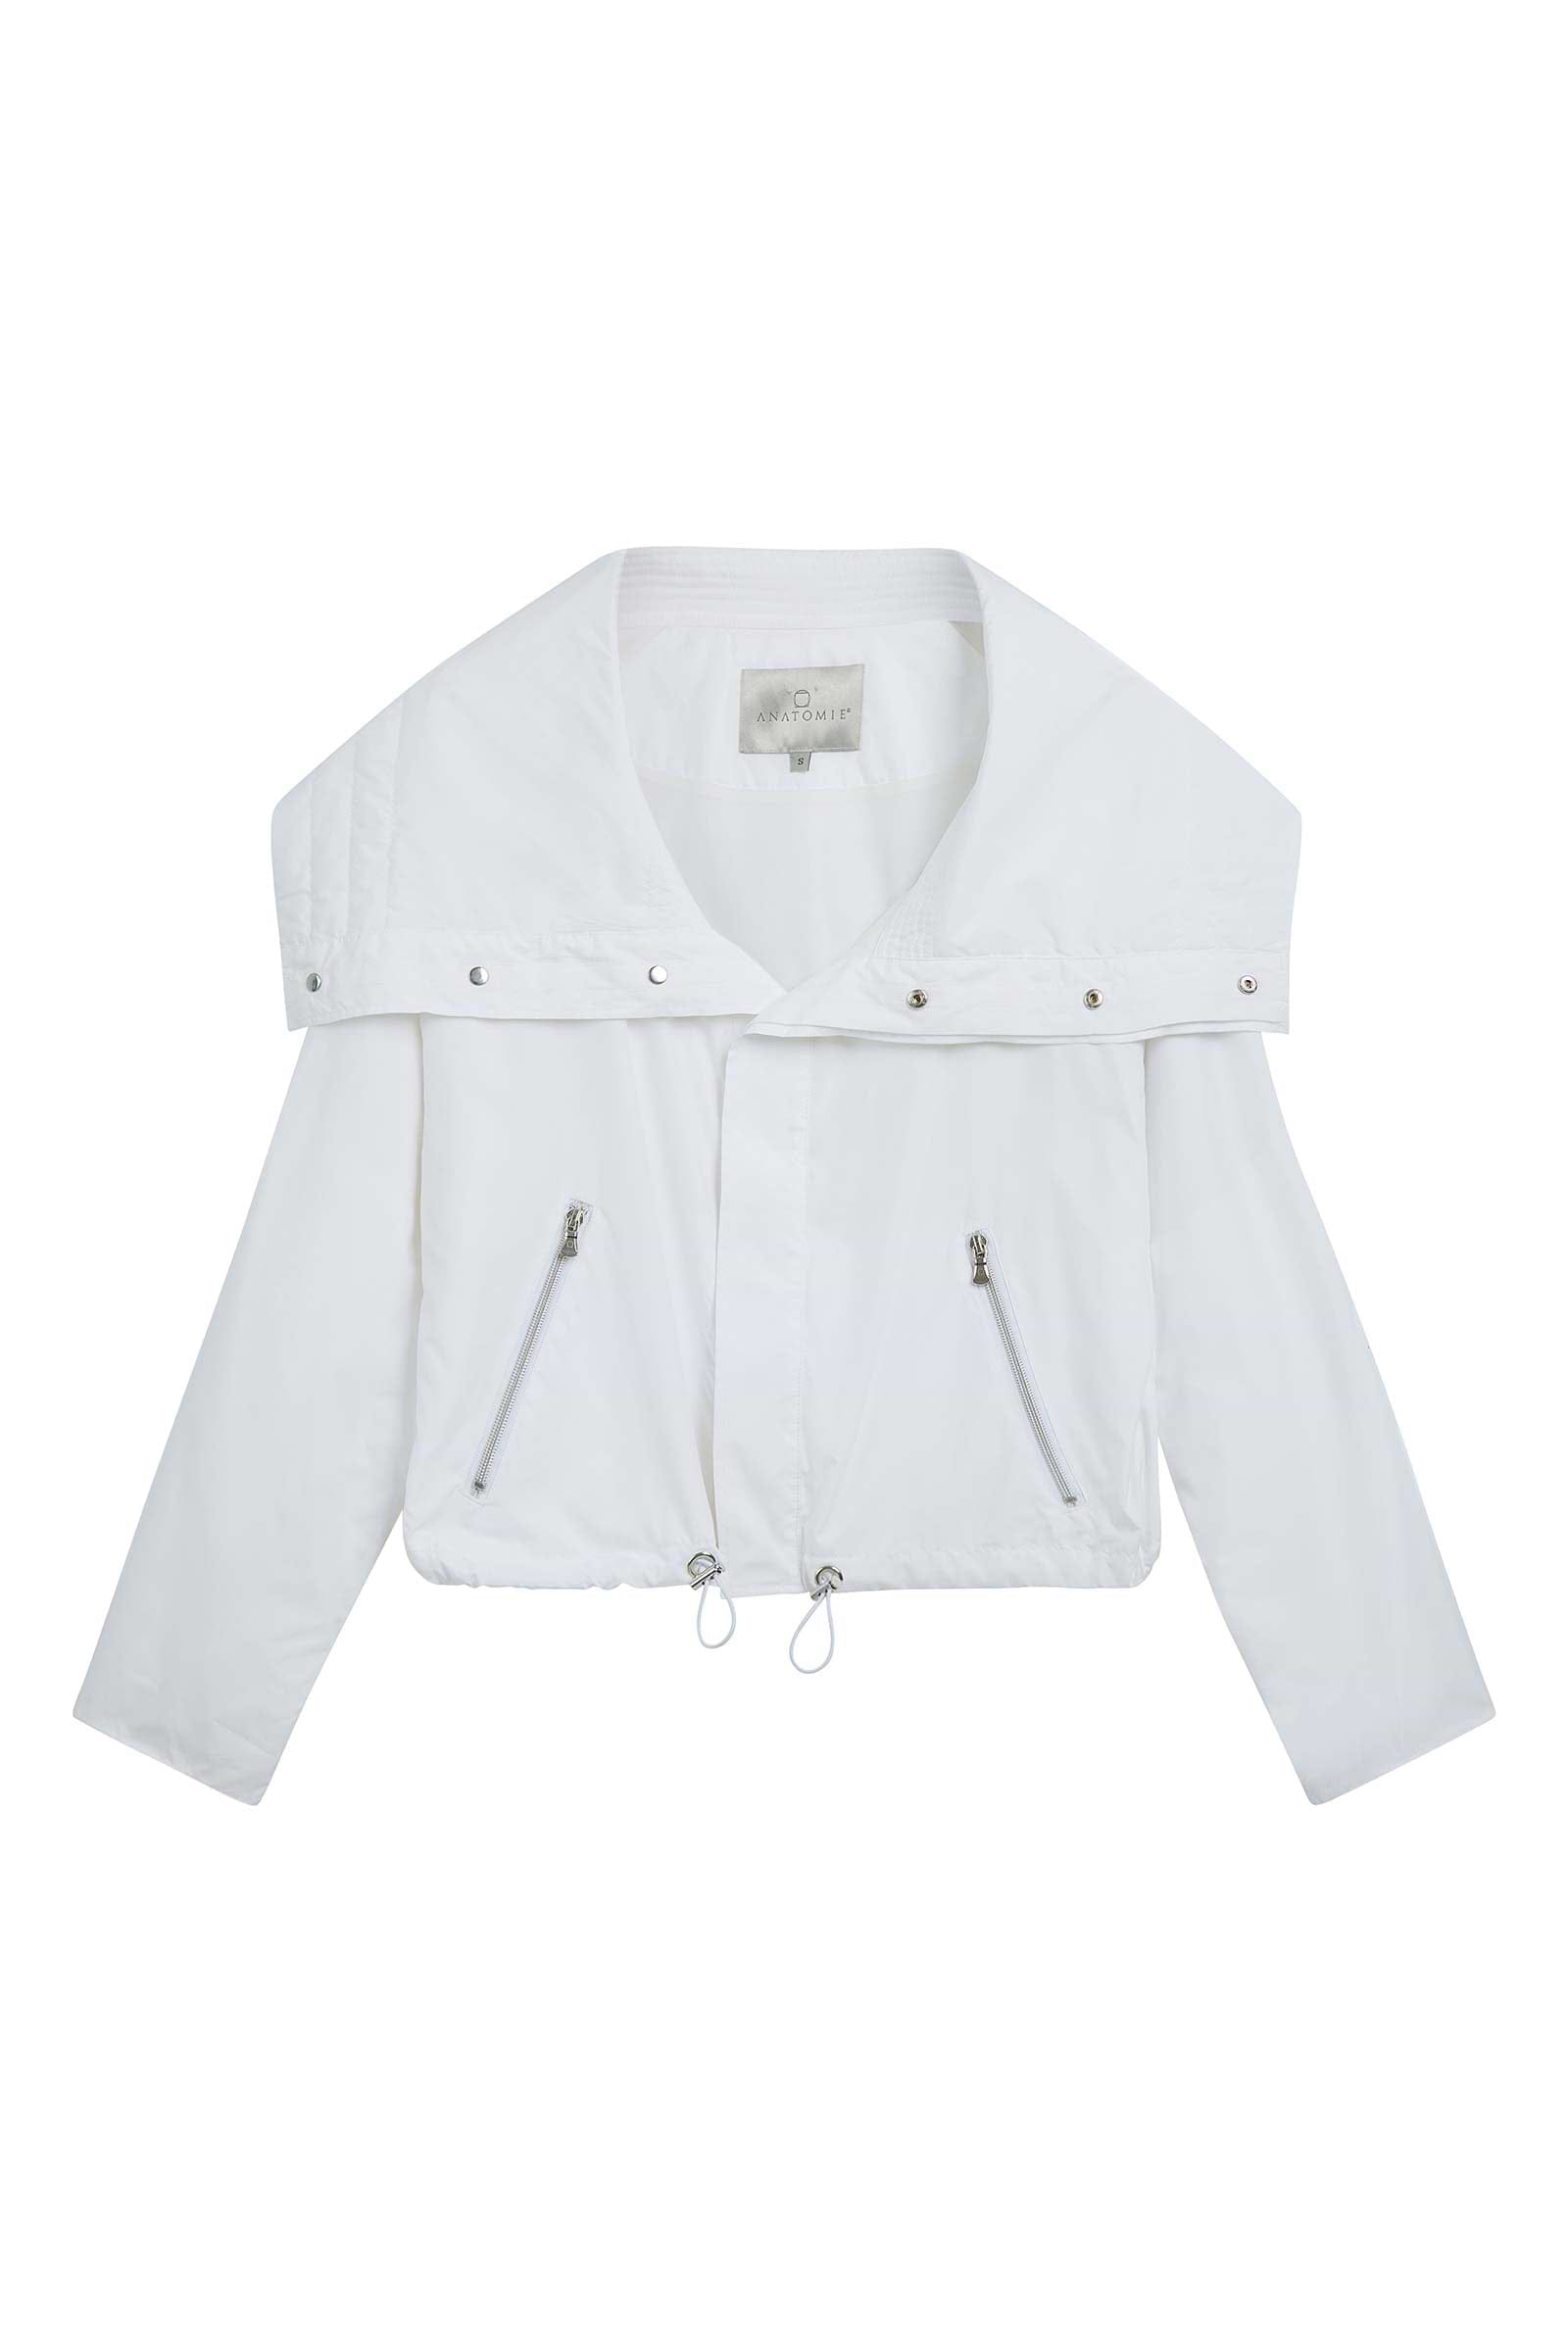 The Best Travel Jacket. Flat Lay of a Casey Jacket in White.